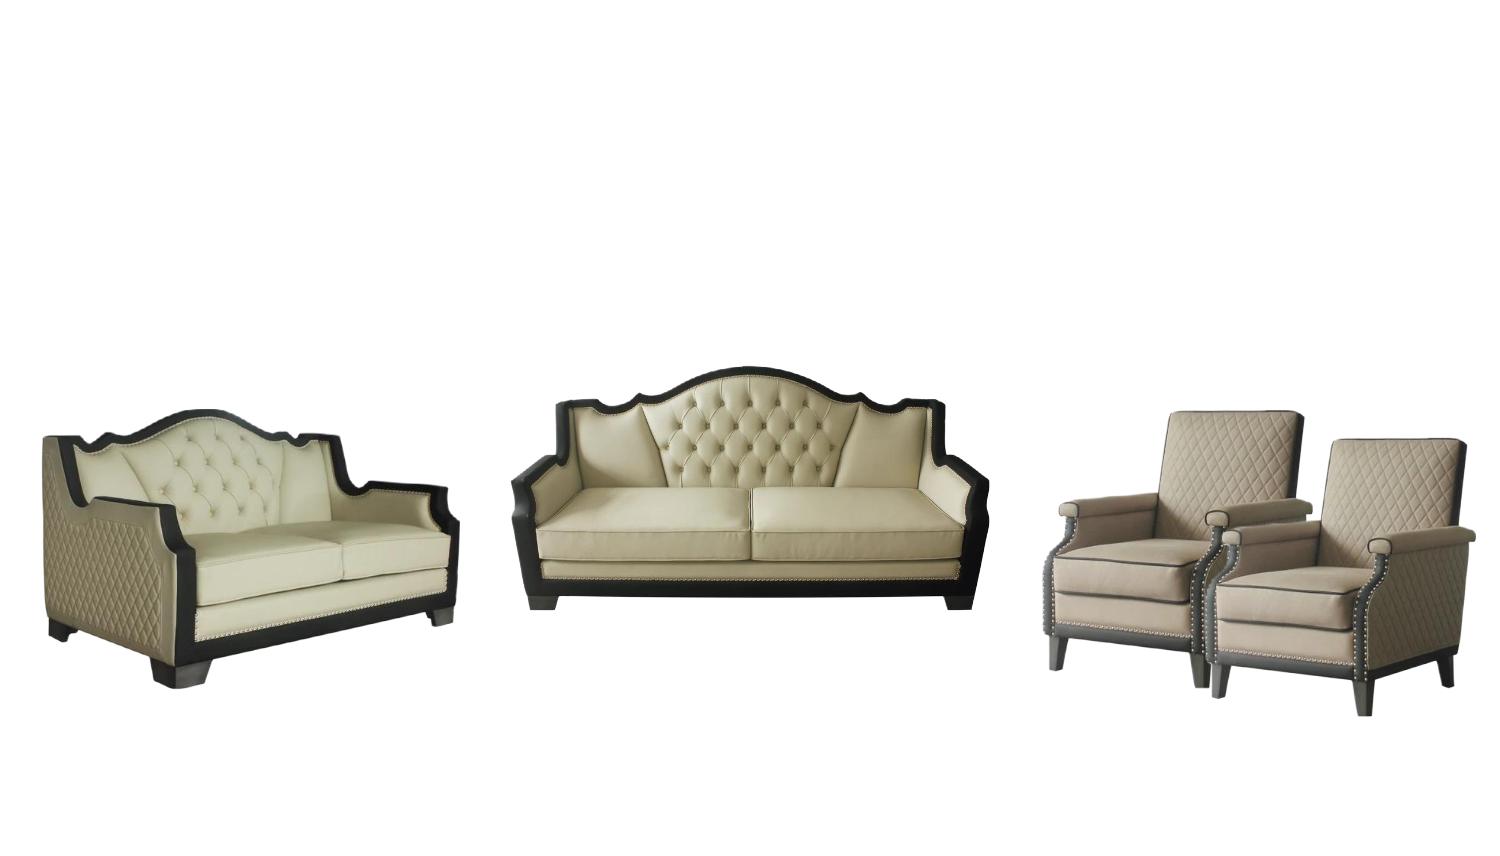 

    
Transitional Beige Sofa + Loveseat + 2 Accent Chairs by Acme House Beatrice 58810-4pcs
